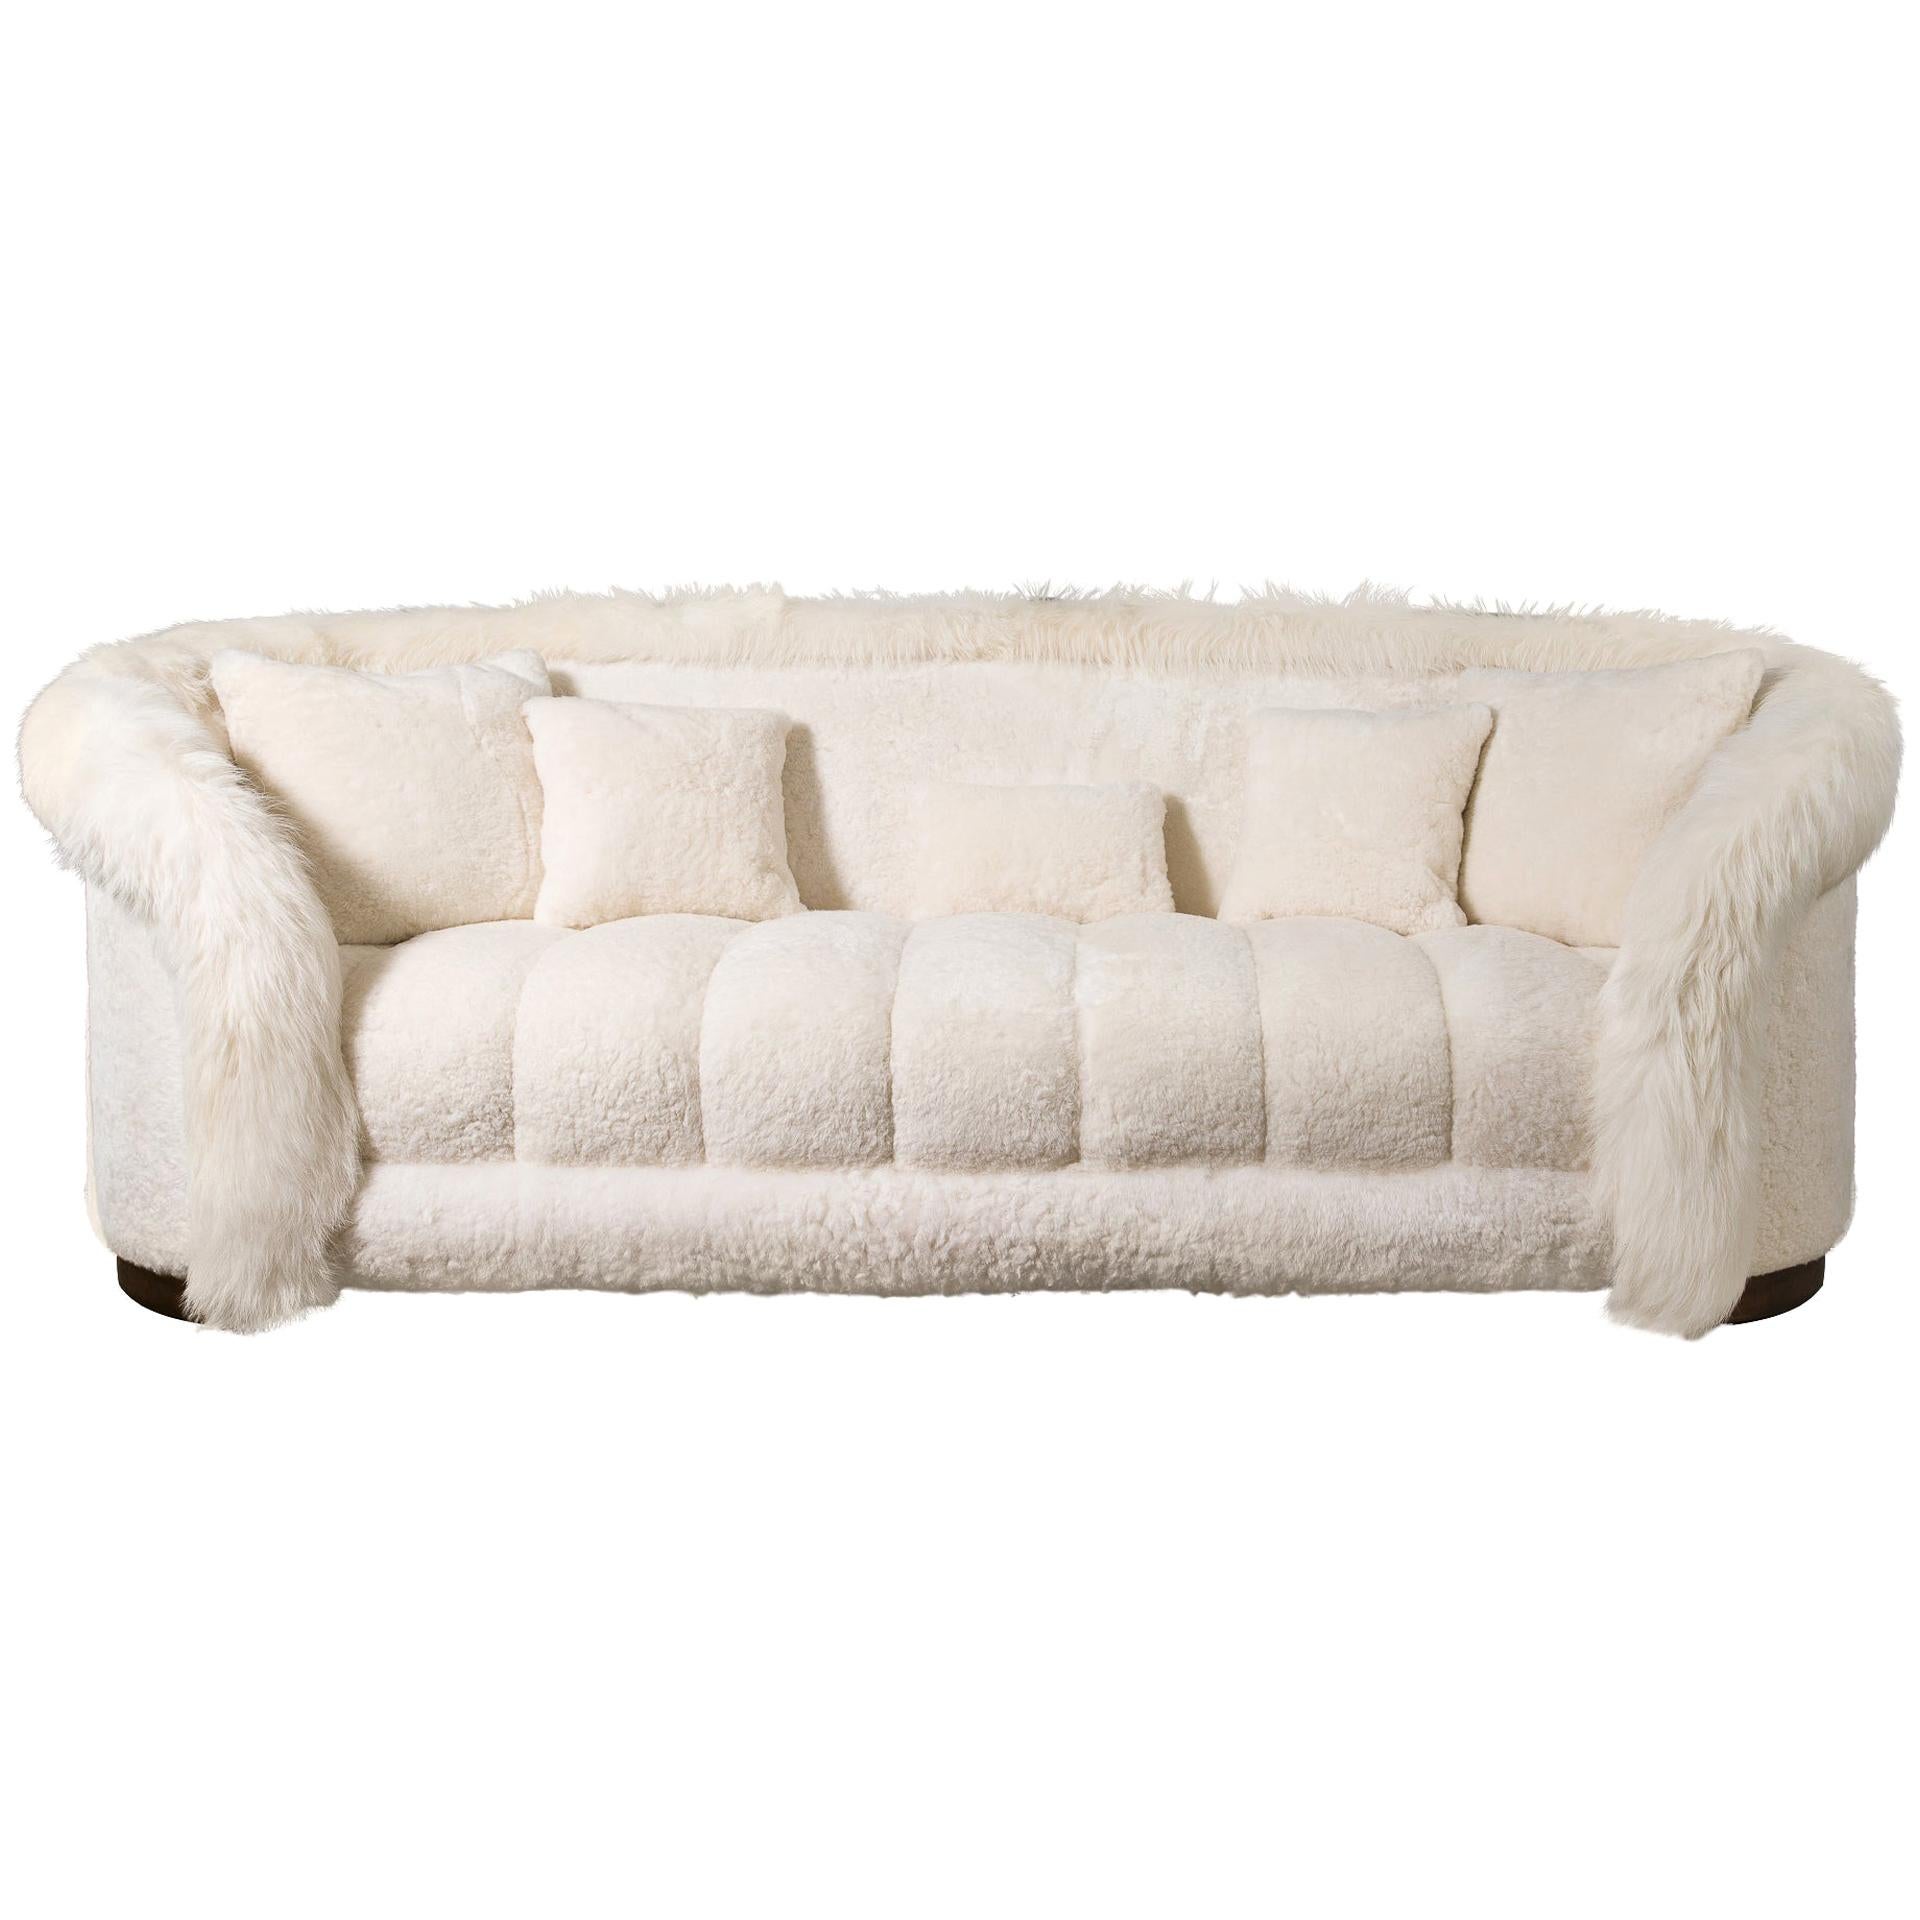 White Fur Sofa, The Lady, Limited Edition